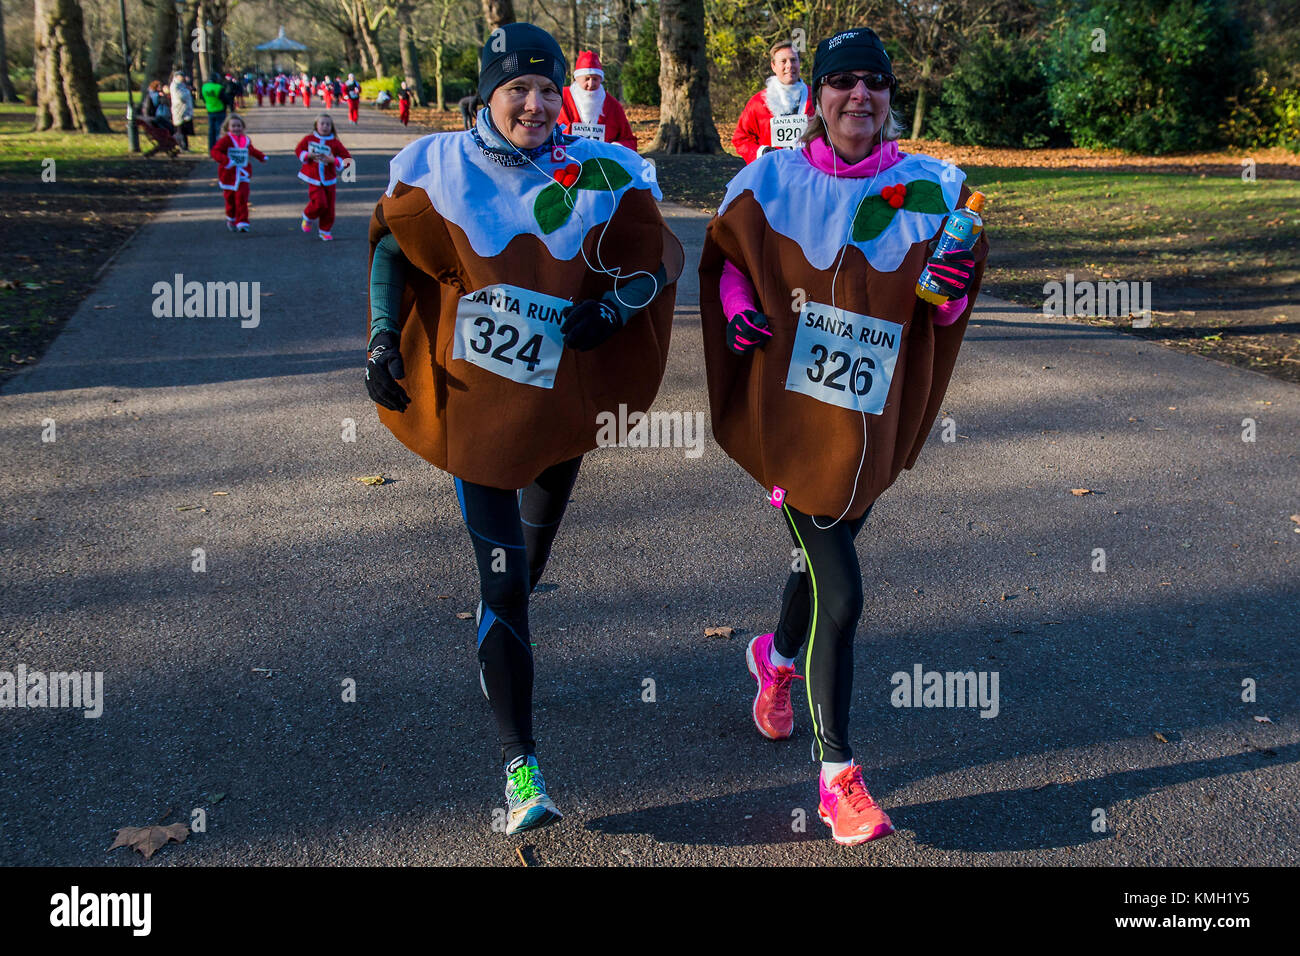 London, UK. 09th Dec, 2017. Christmas puddings - 2000 Santas of all ages take part in the annual Santa Run in Battersea Park to support Noah’s Ark Children’s Hospice. Credit: Guy Bell/Alamy Live News Stock Photo